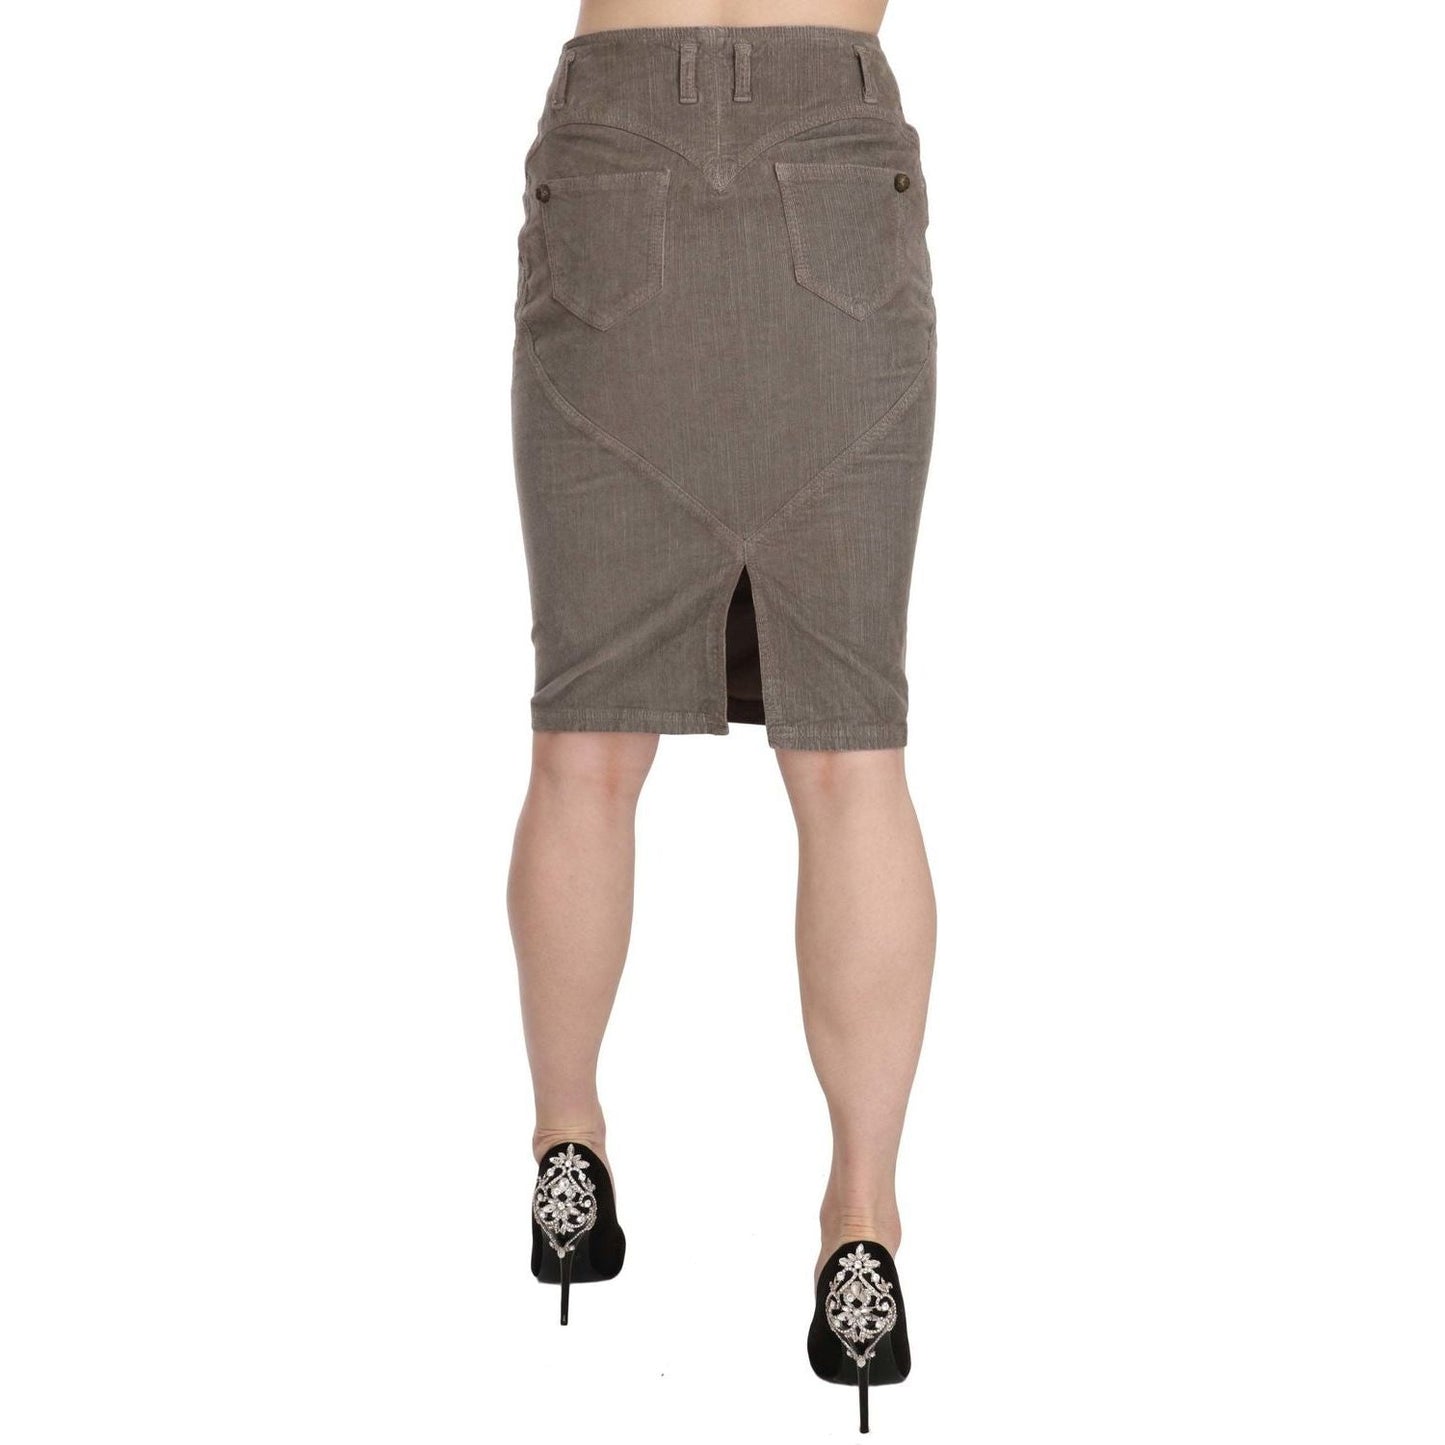 Just Cavalli Chic Gray Pencil Skirt with Logo Details gray-corduroy-pencil-straight-a-line-skirt